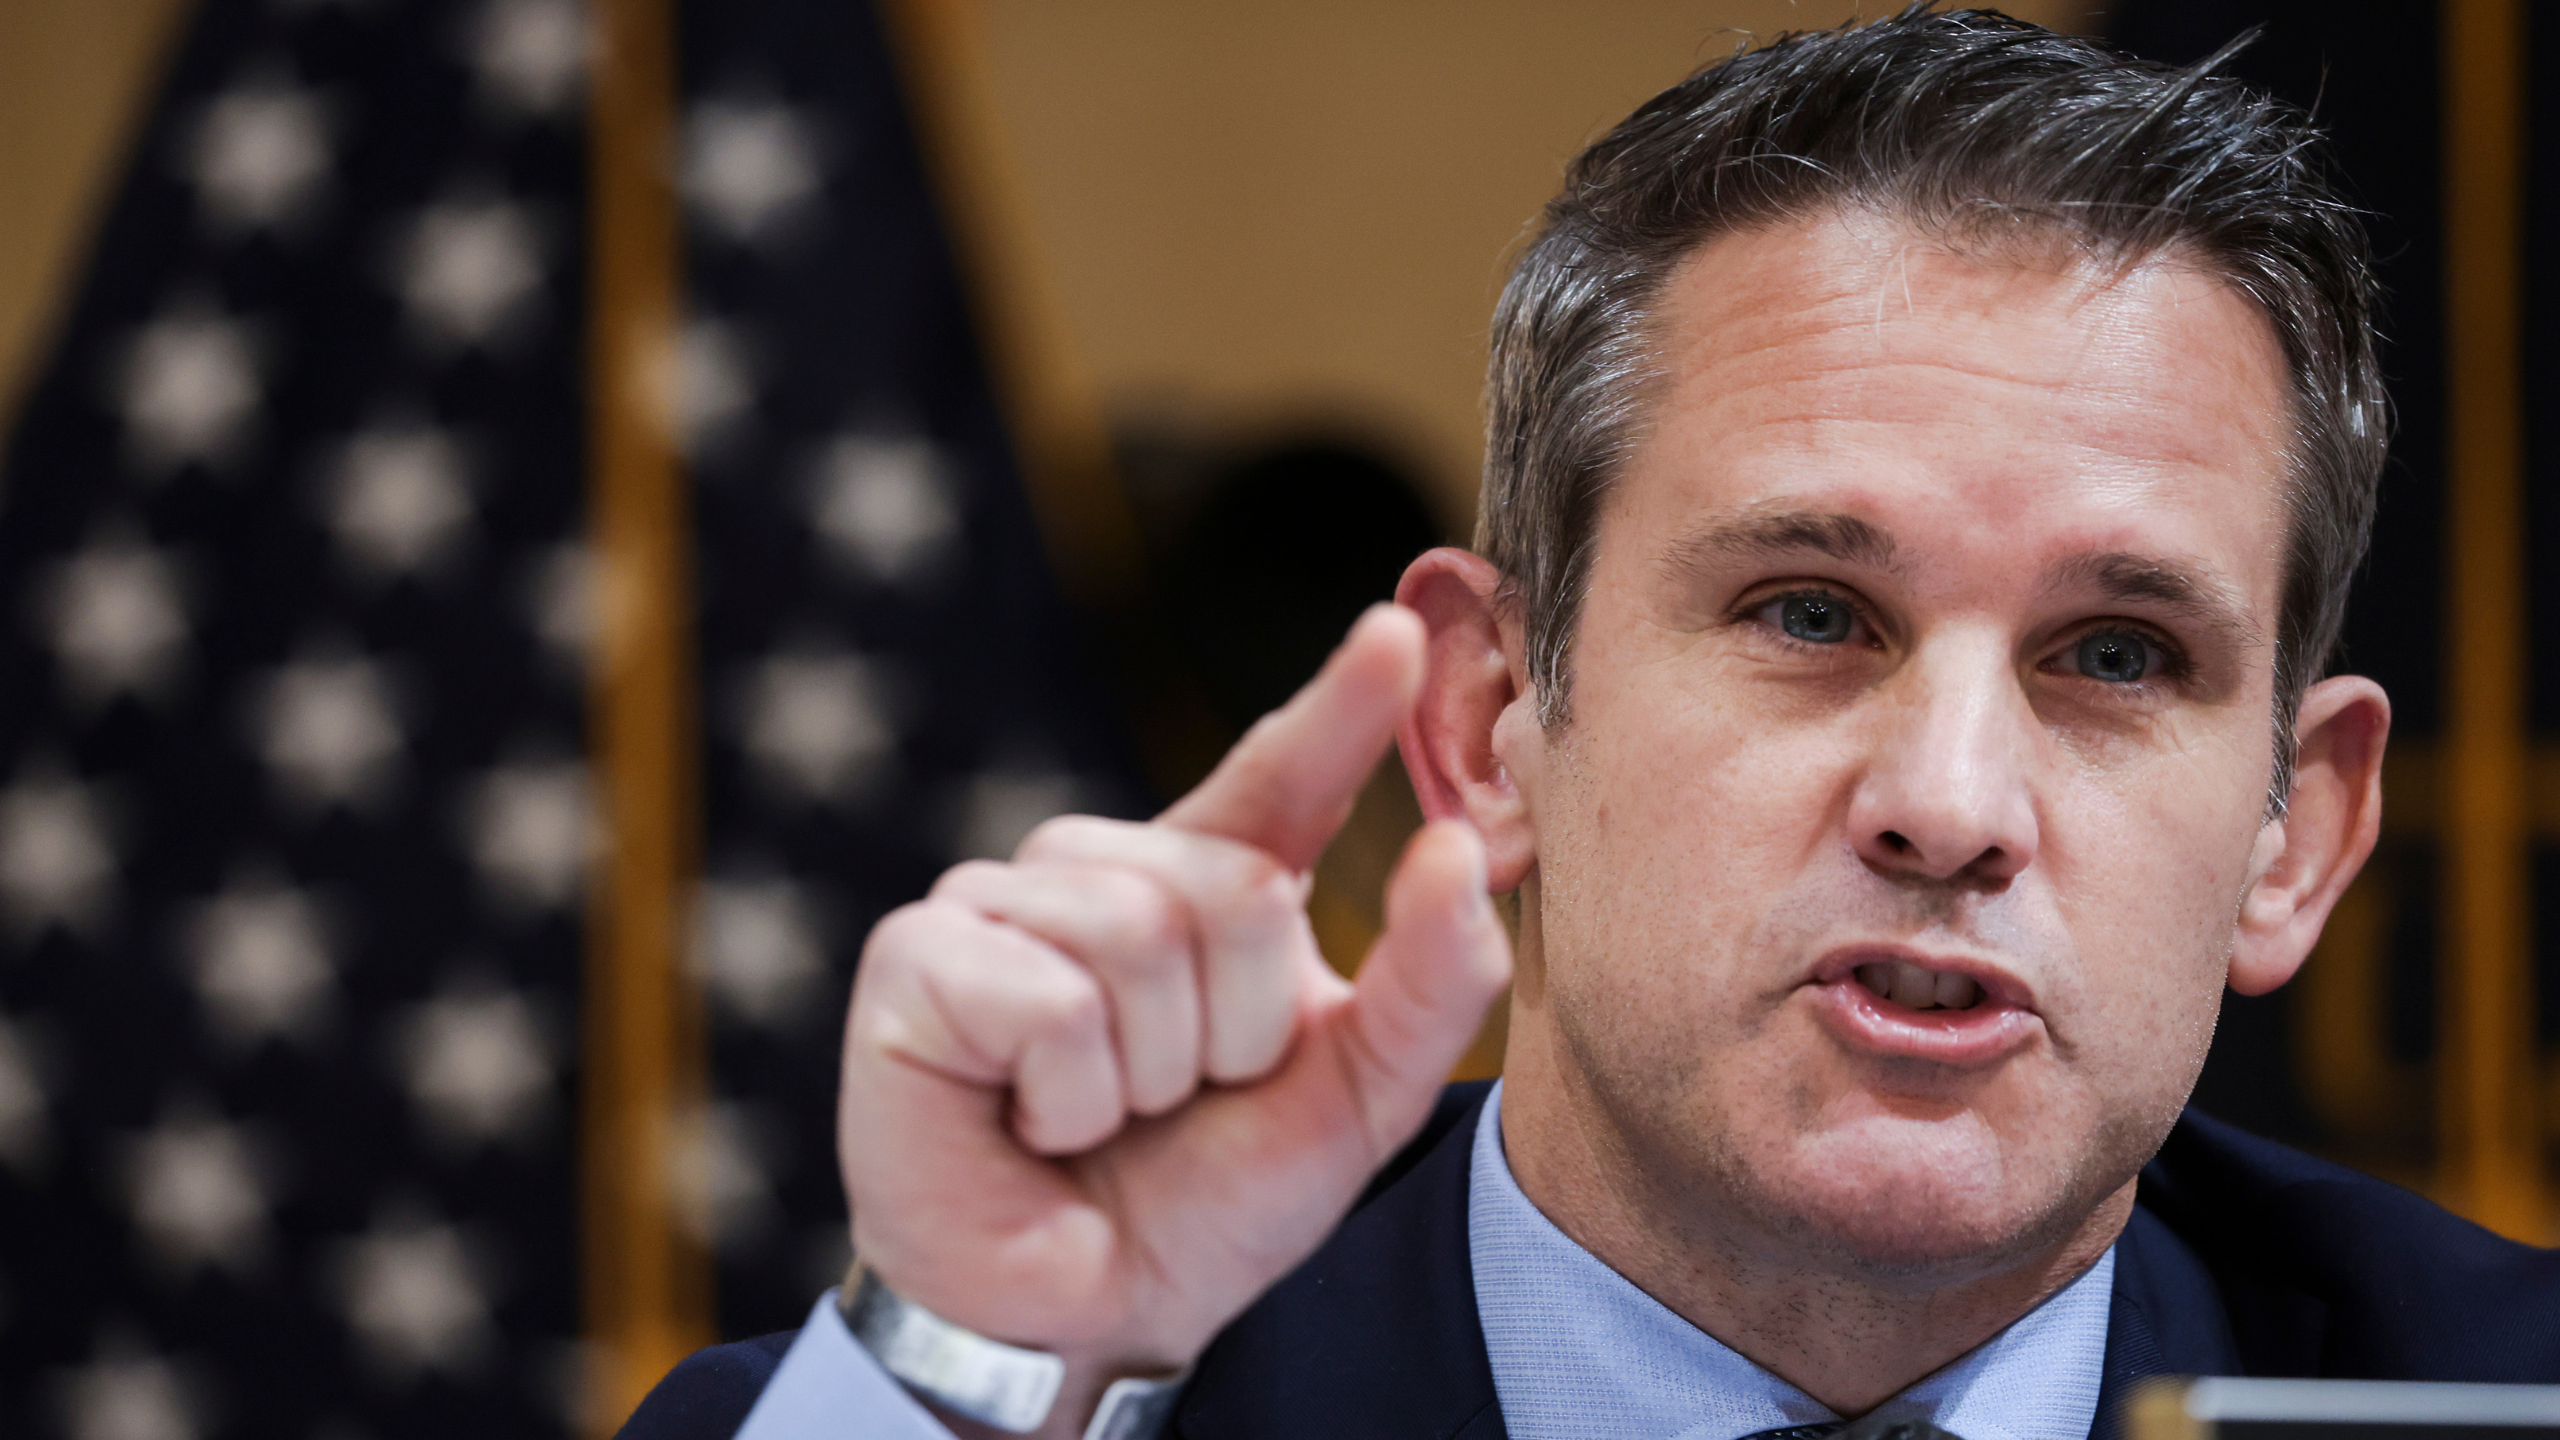 Adam Kinzinger Declares Jan. 6 Witnesses Pleading the 5th ‘Says a Lot’